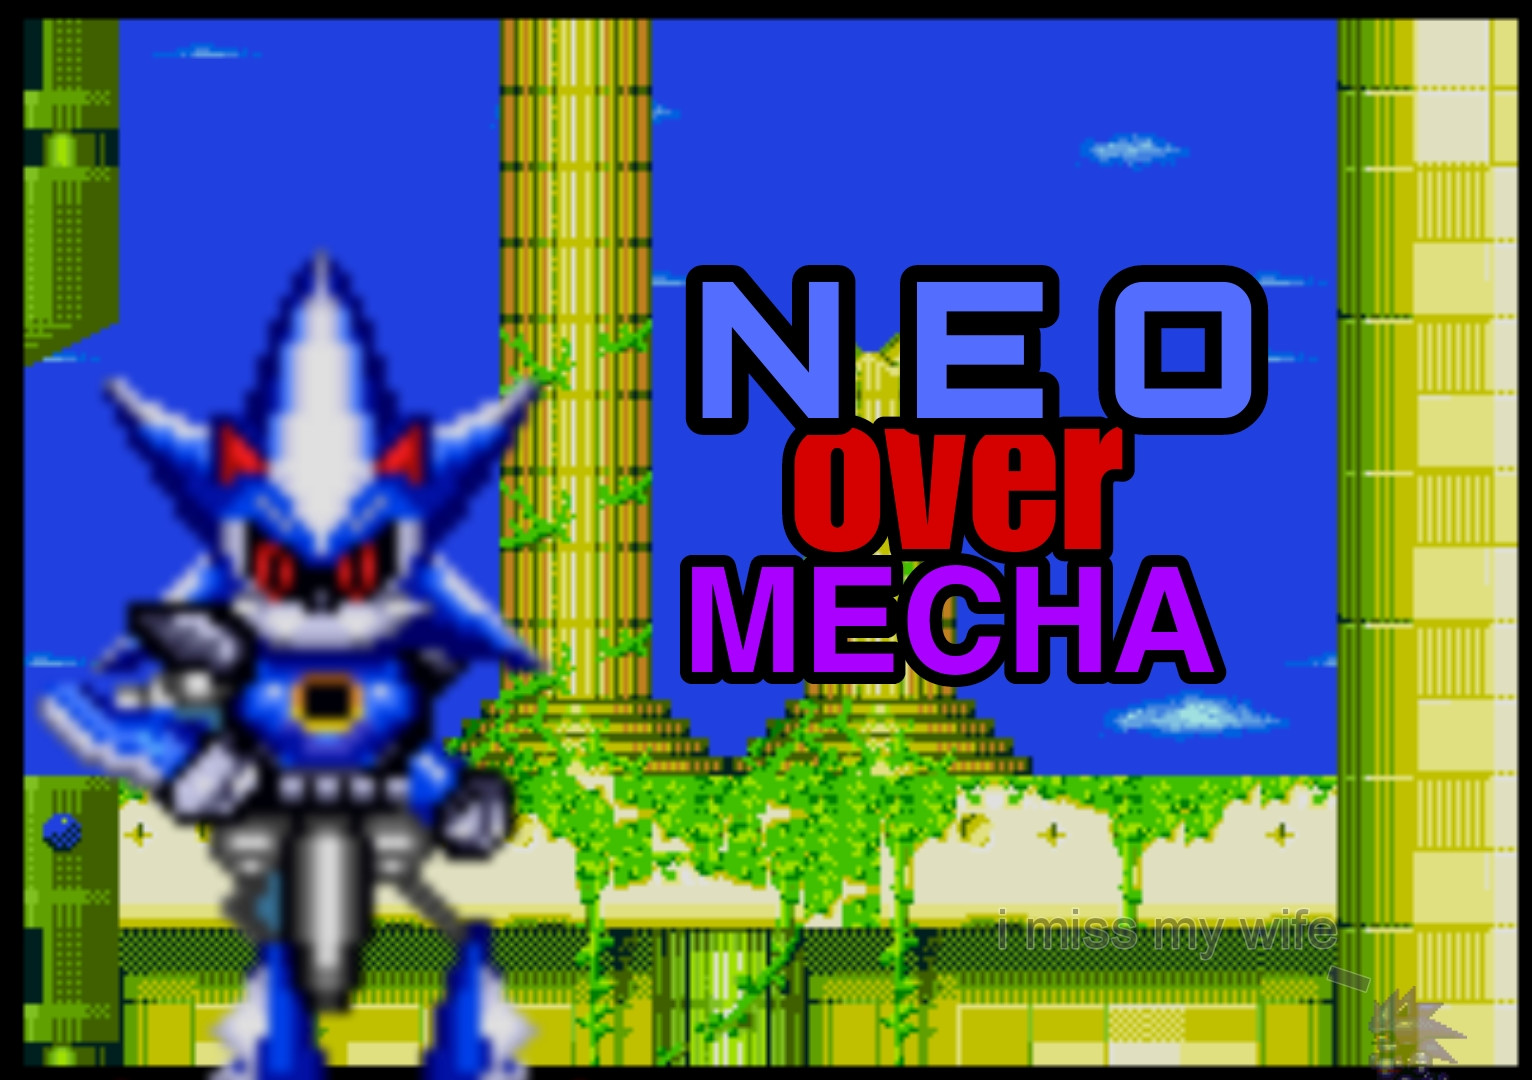 Metal Sonic in Sonic 3 A.I.R [Sonic 3 A.I.R.] [Mods]